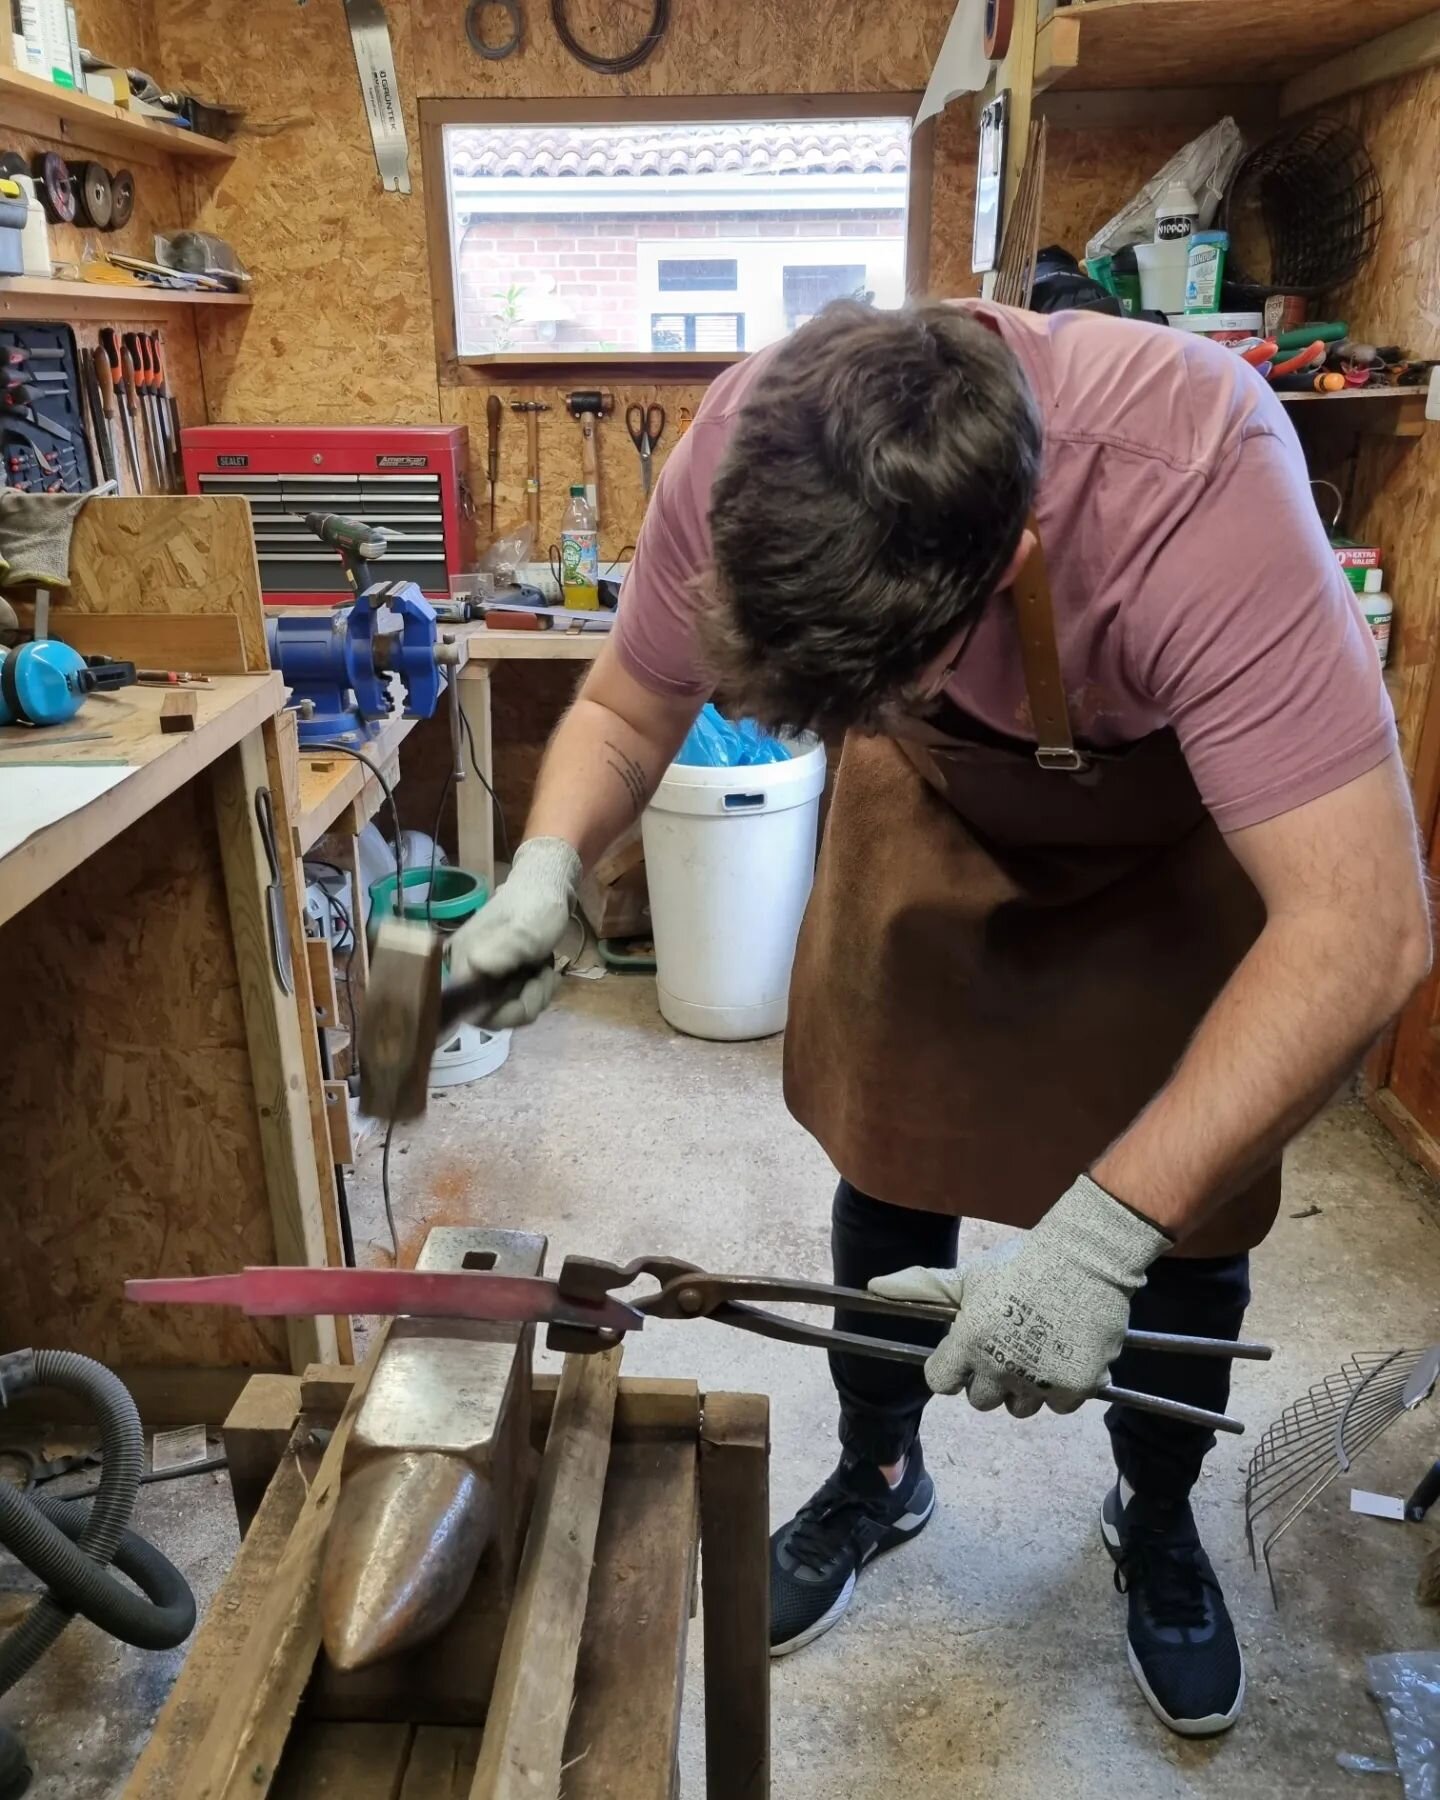 @ryancahillauthor was in the workshop today making blades, chatting books, snd playing with swords. It was good fun, and he left with the same number of fingers that he arrived with so, great success.

The knife blade is done but the hilt and pommel 